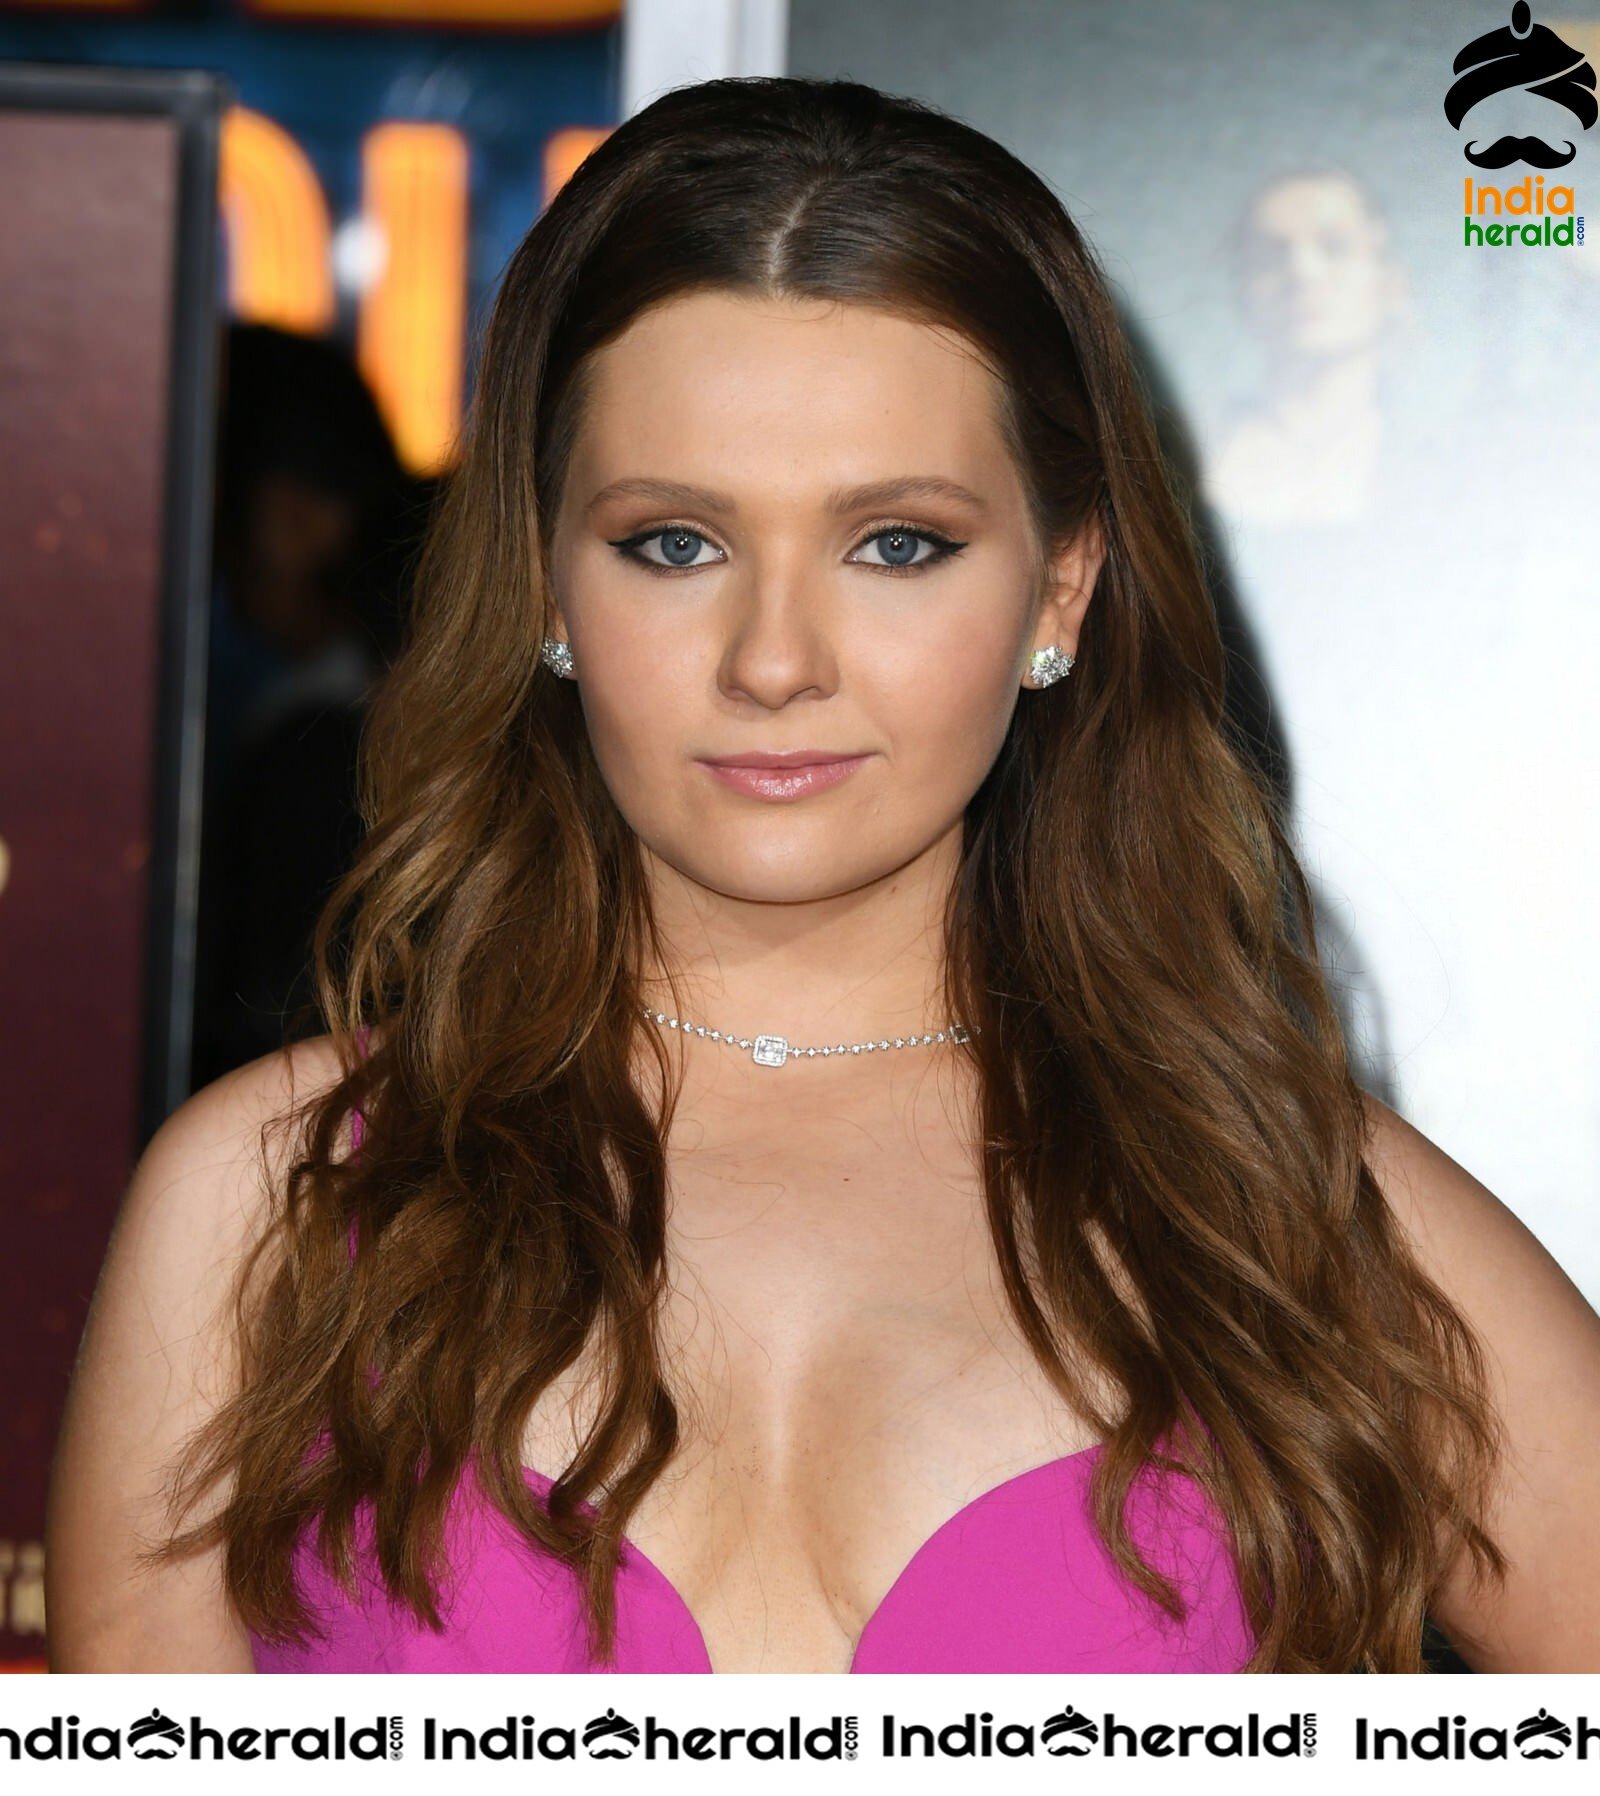 Abigail Breslin at Zombieland Double Tap Premiere in Westwood CA Set 4